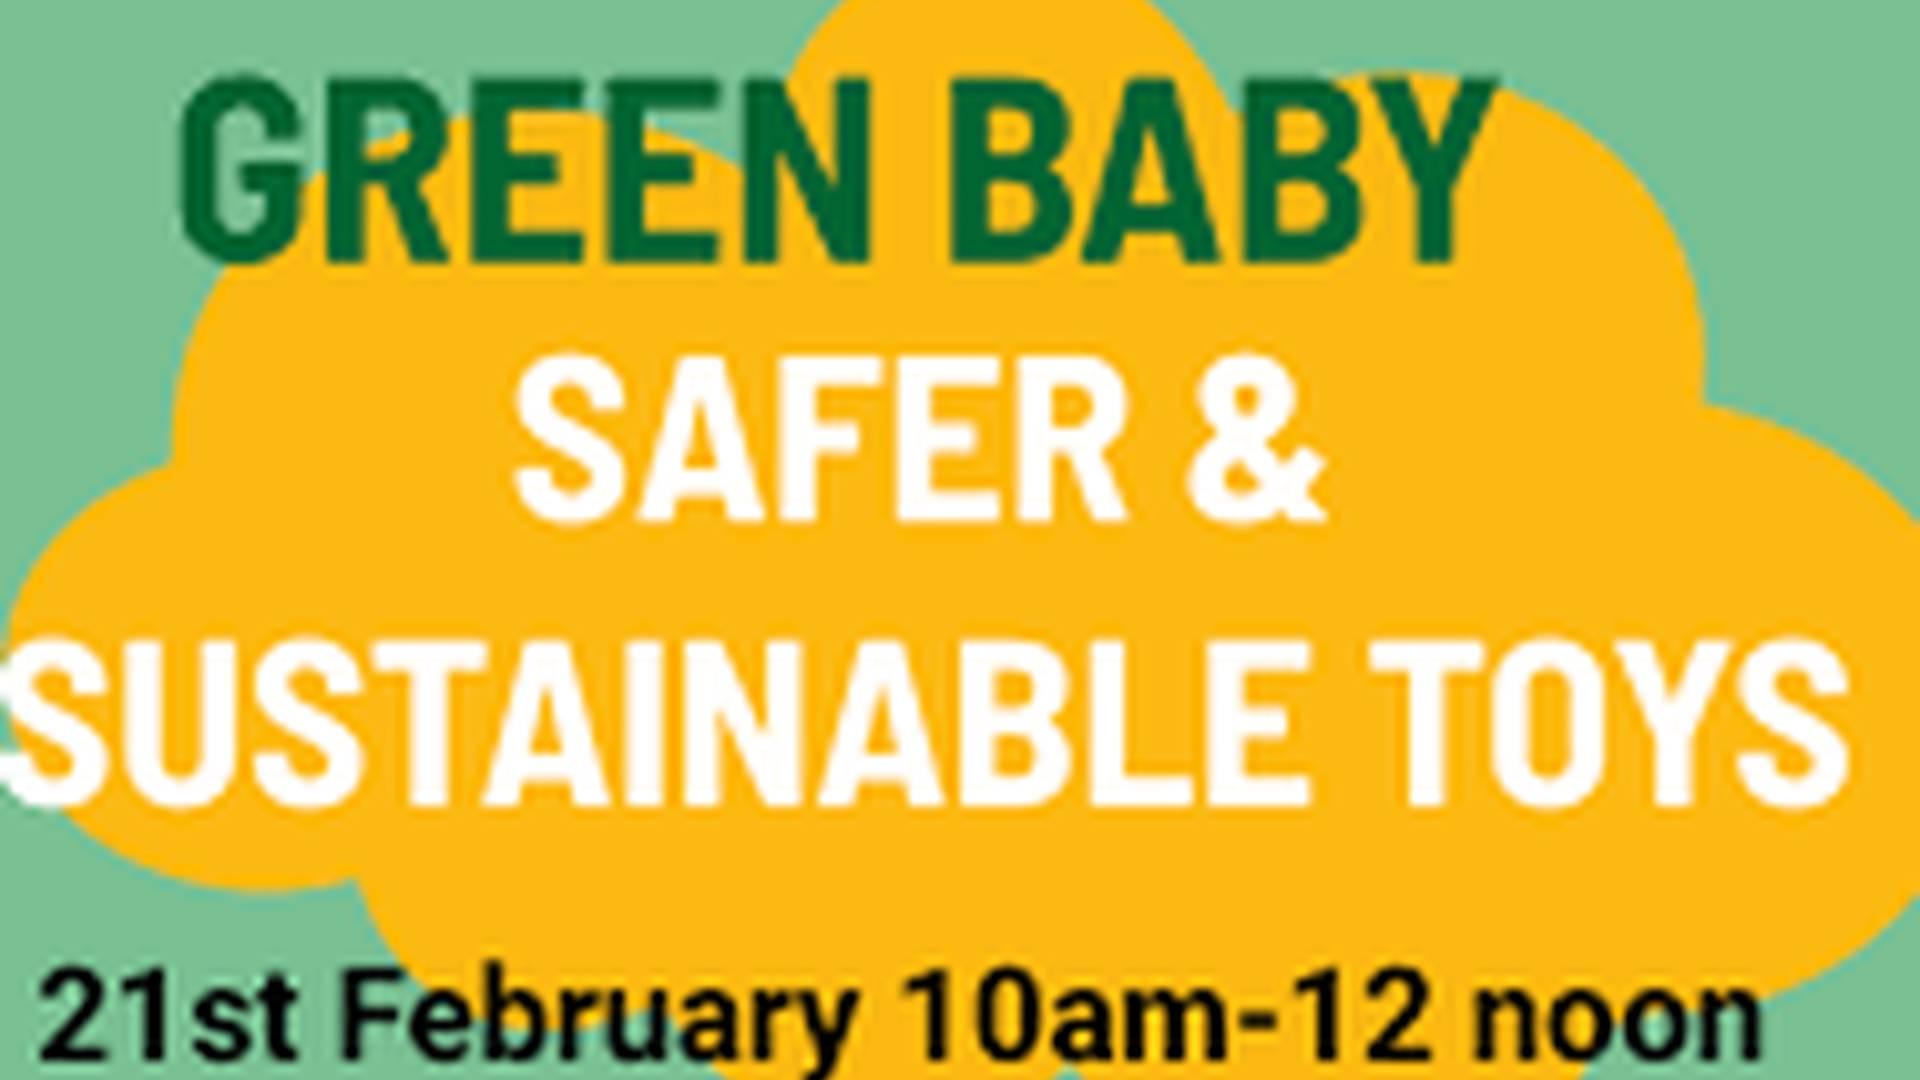 GREEN BABY - "SAFER & SUSTAINABLE TOYS" WORKSHOP photo